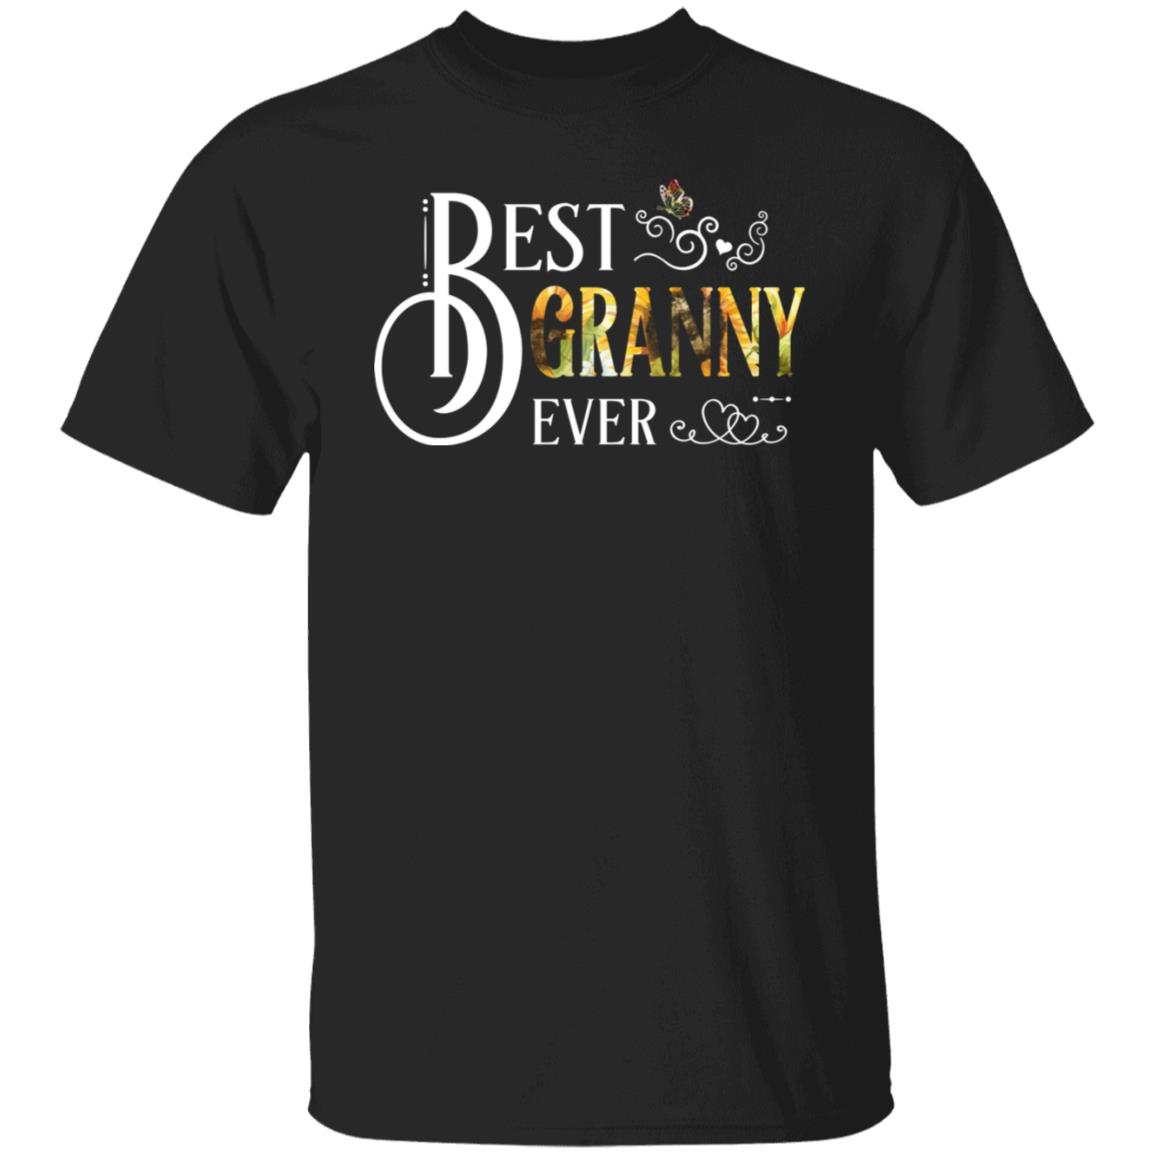 Best Granny ever gift shirt for Mother's Day